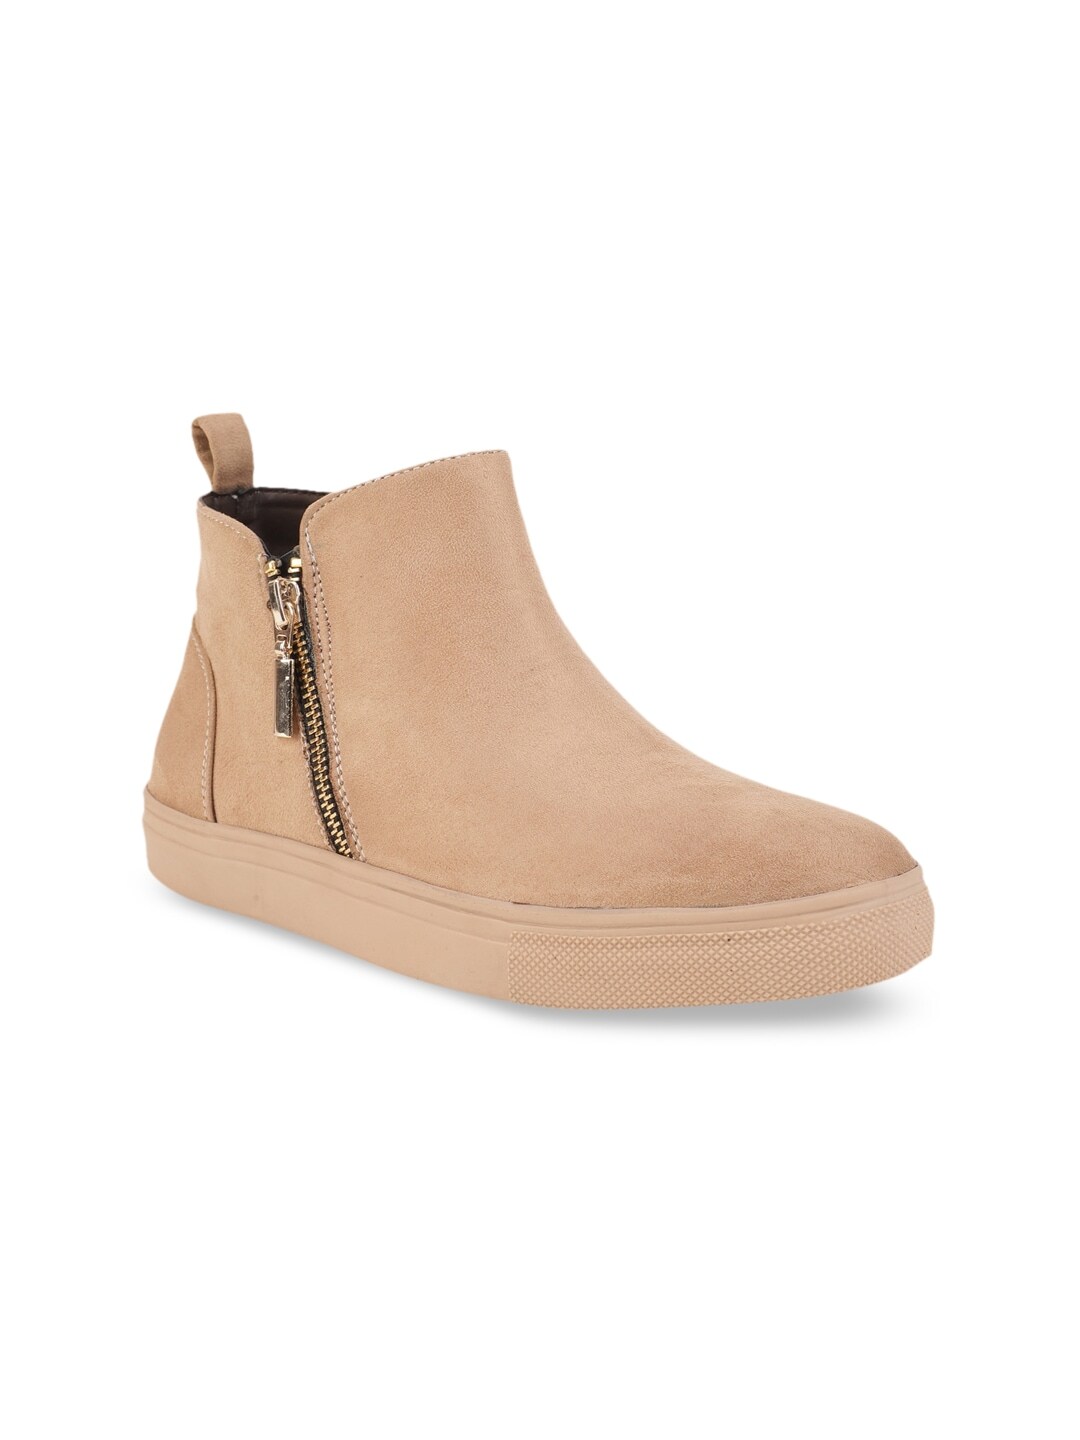 Bruno Manetti Women Beige Solid Flat Boots Price in India